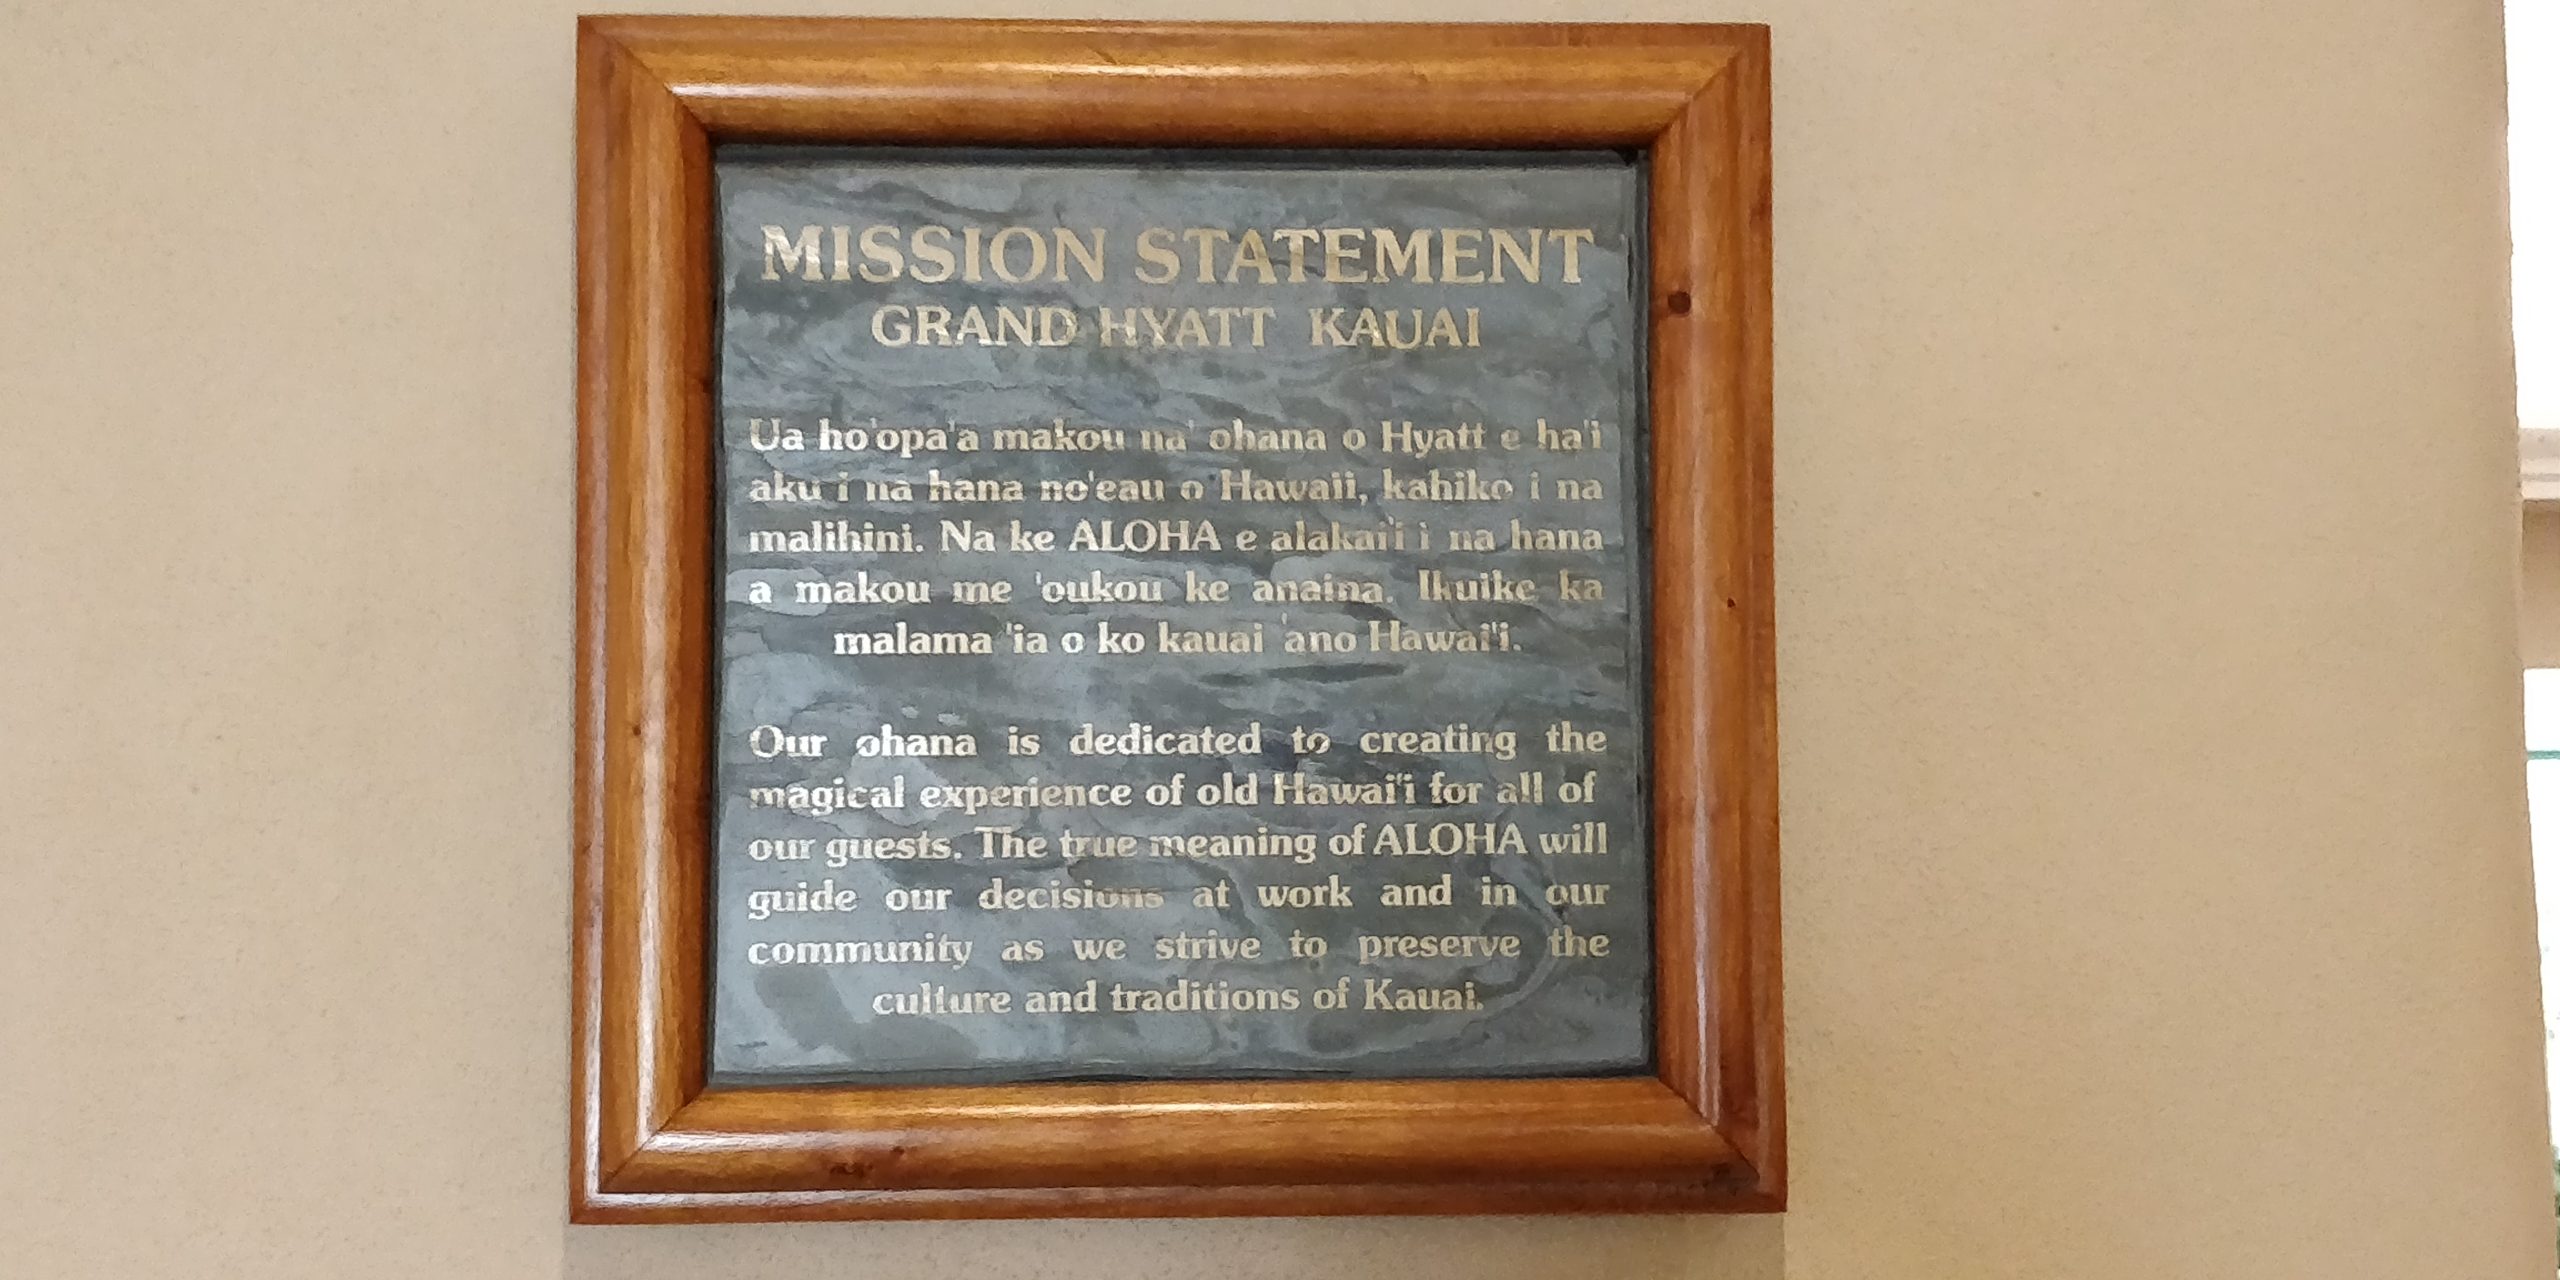 PICTURE OF THE PLAQUE DESCRIBING HOTEL'S MISSION STATEMENT